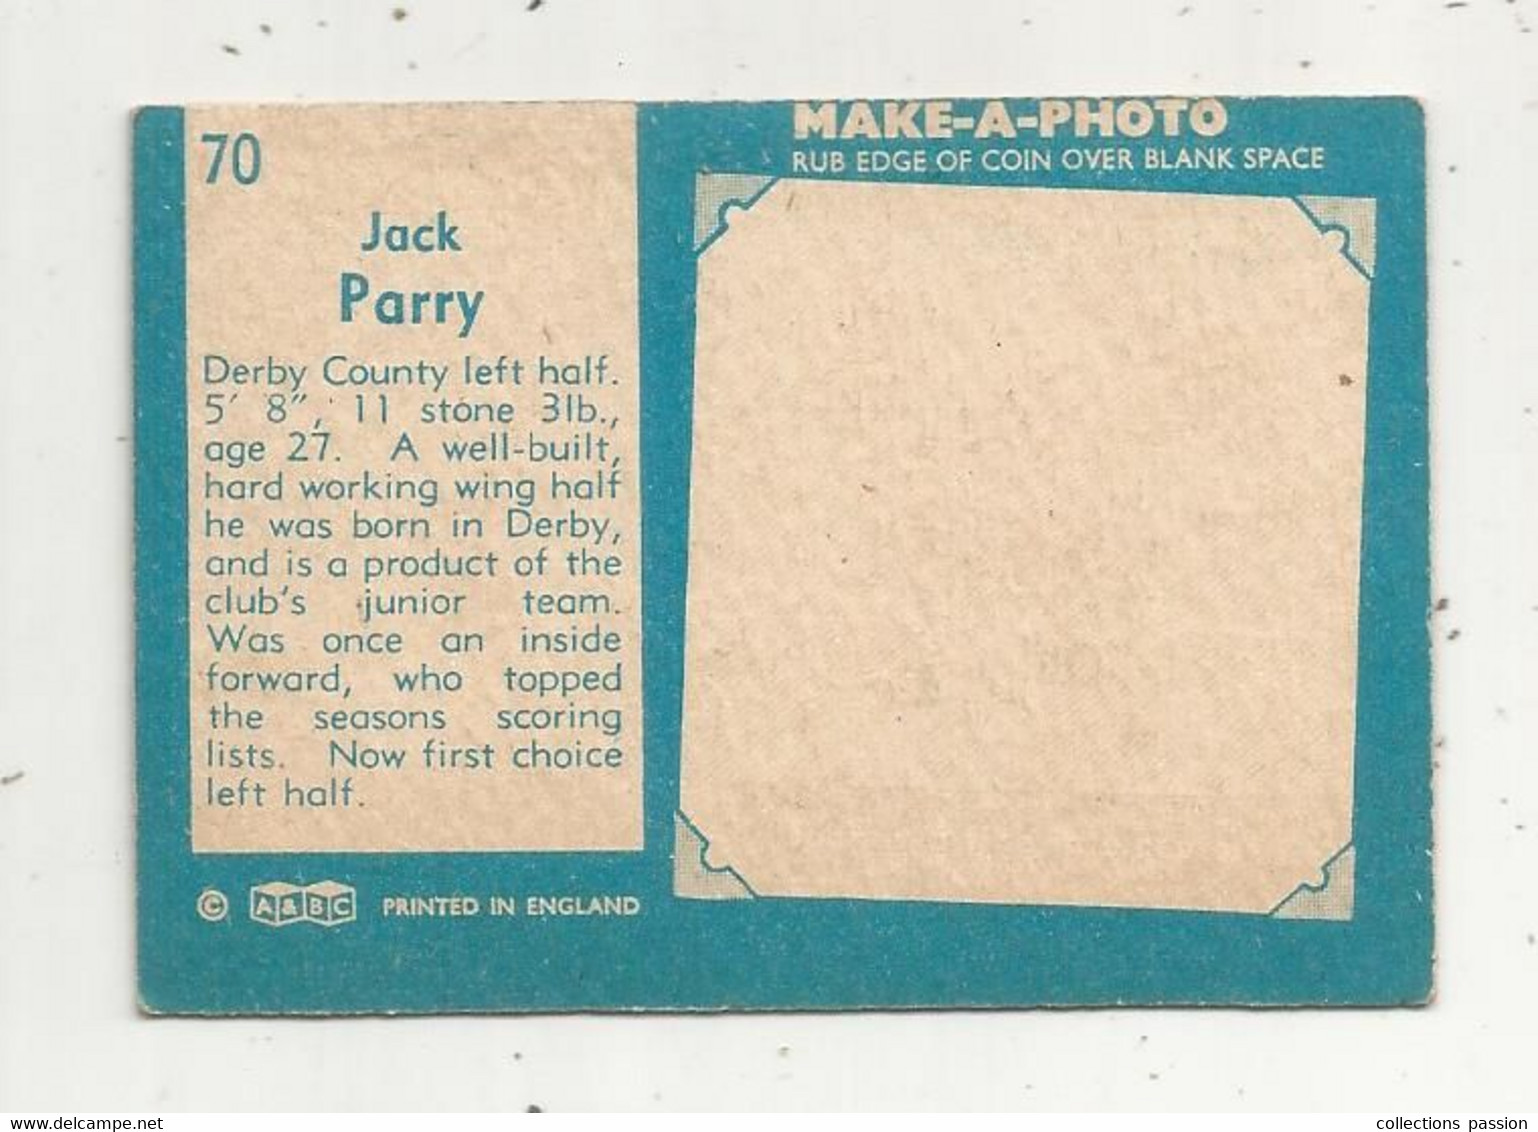 Trading Card , A&BC , England , Chewing Gum , Serie : Make A Photo , Année 60 , N° 70 , JACK PARRY , Derby County - Trading Cards